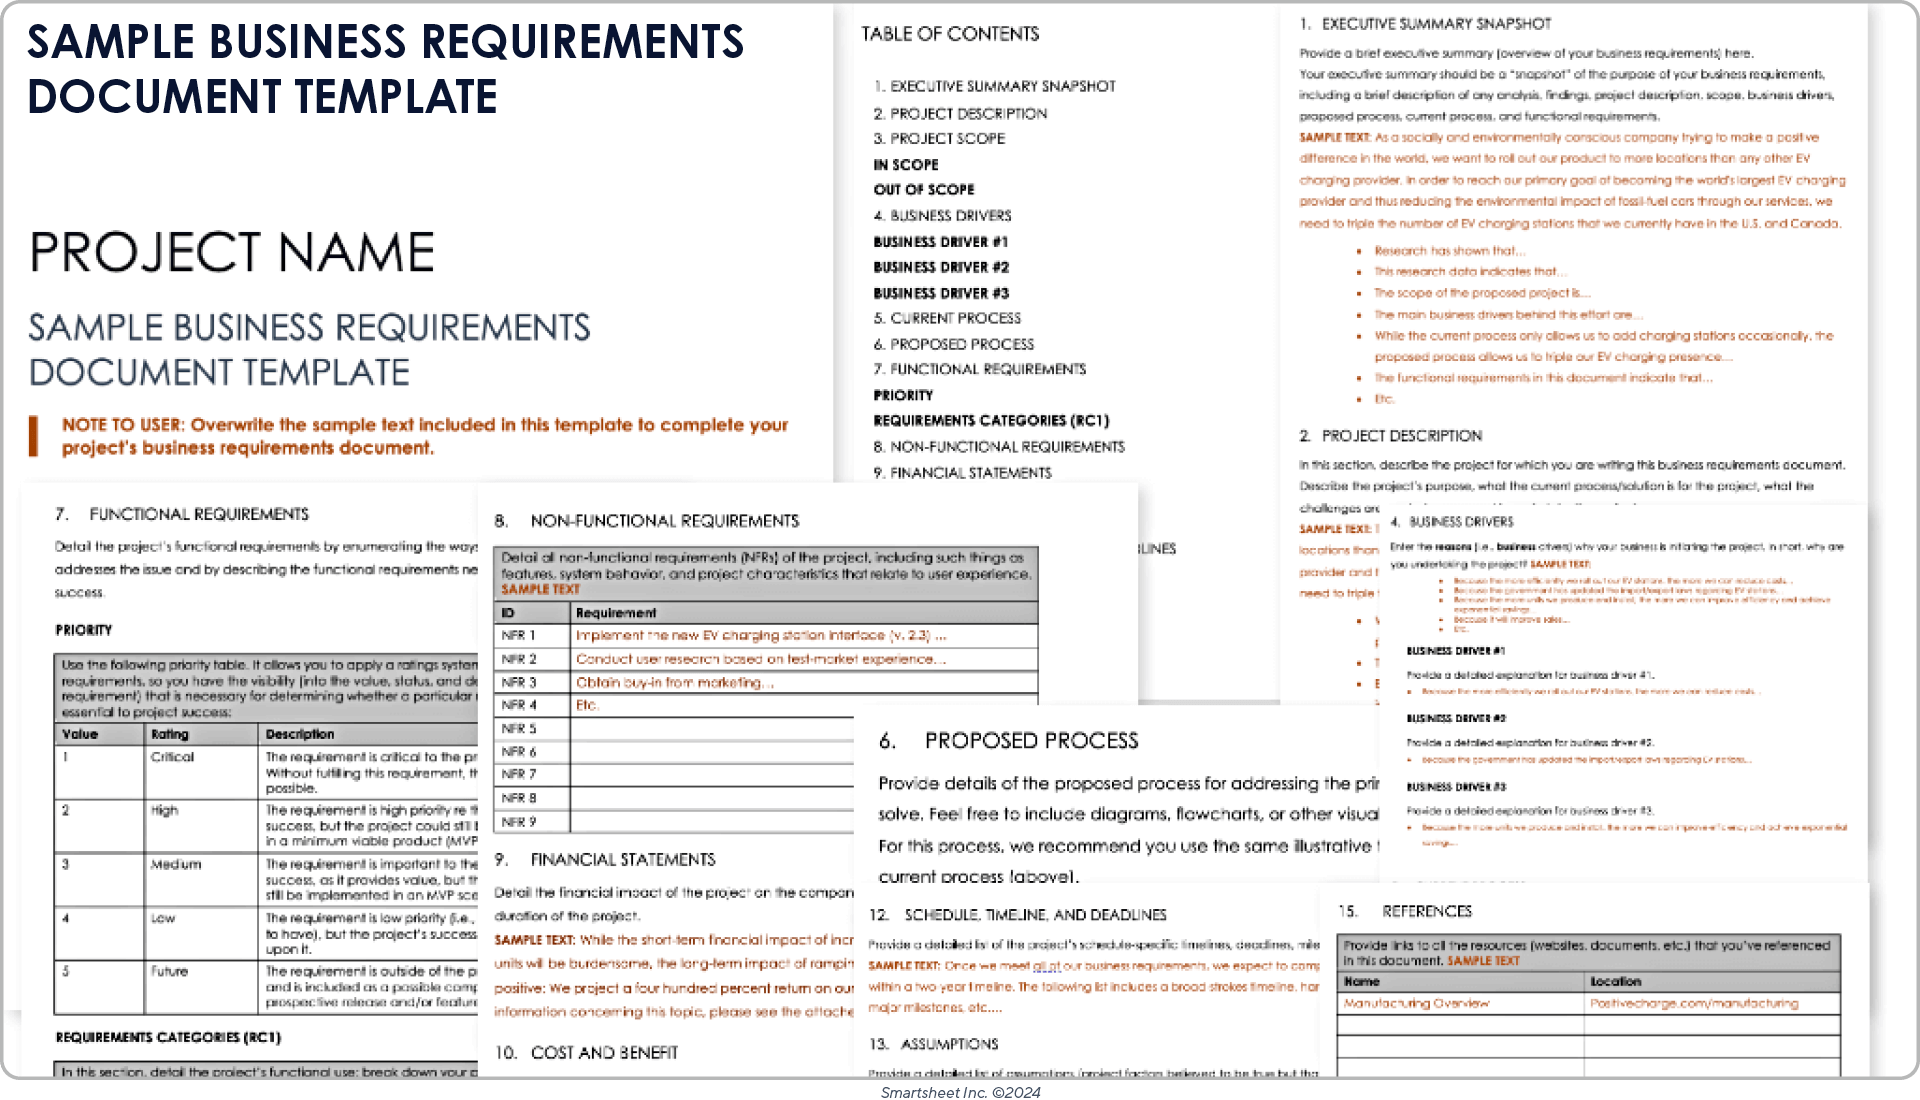 Sample Business Requirements Document Template